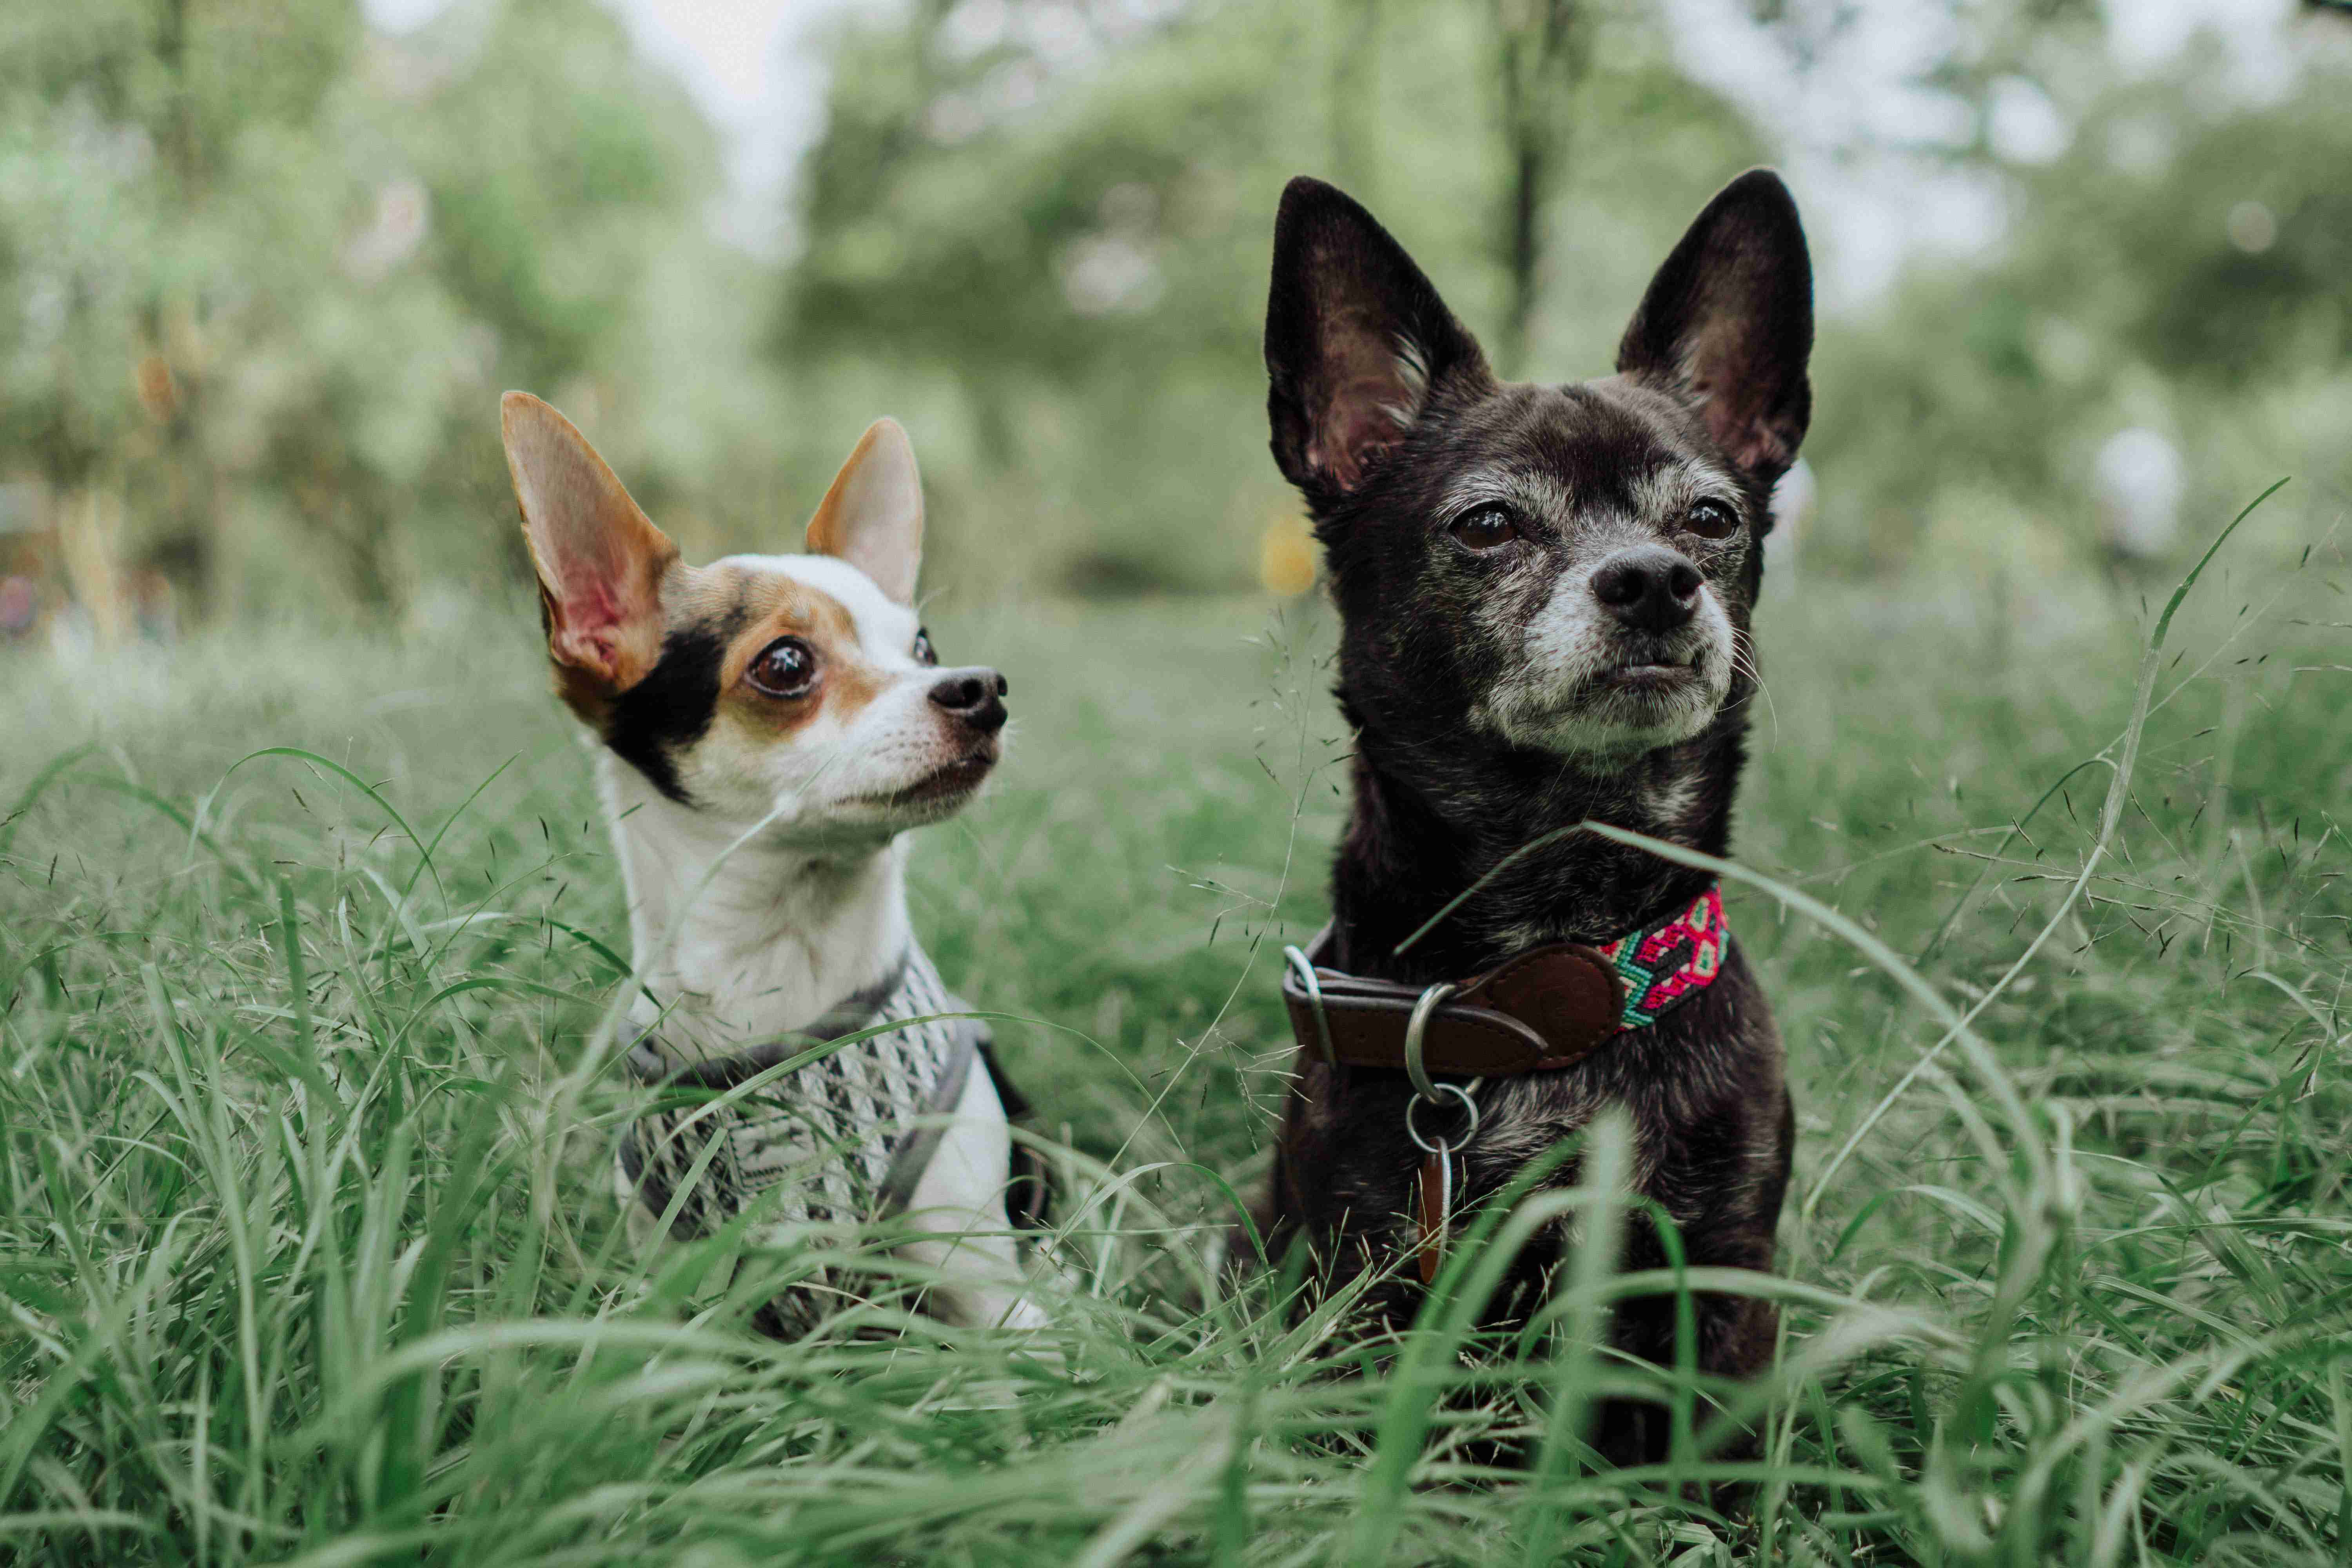 Can anger issues in Chihuahuas be a result of a lack of socialization with other dogs?